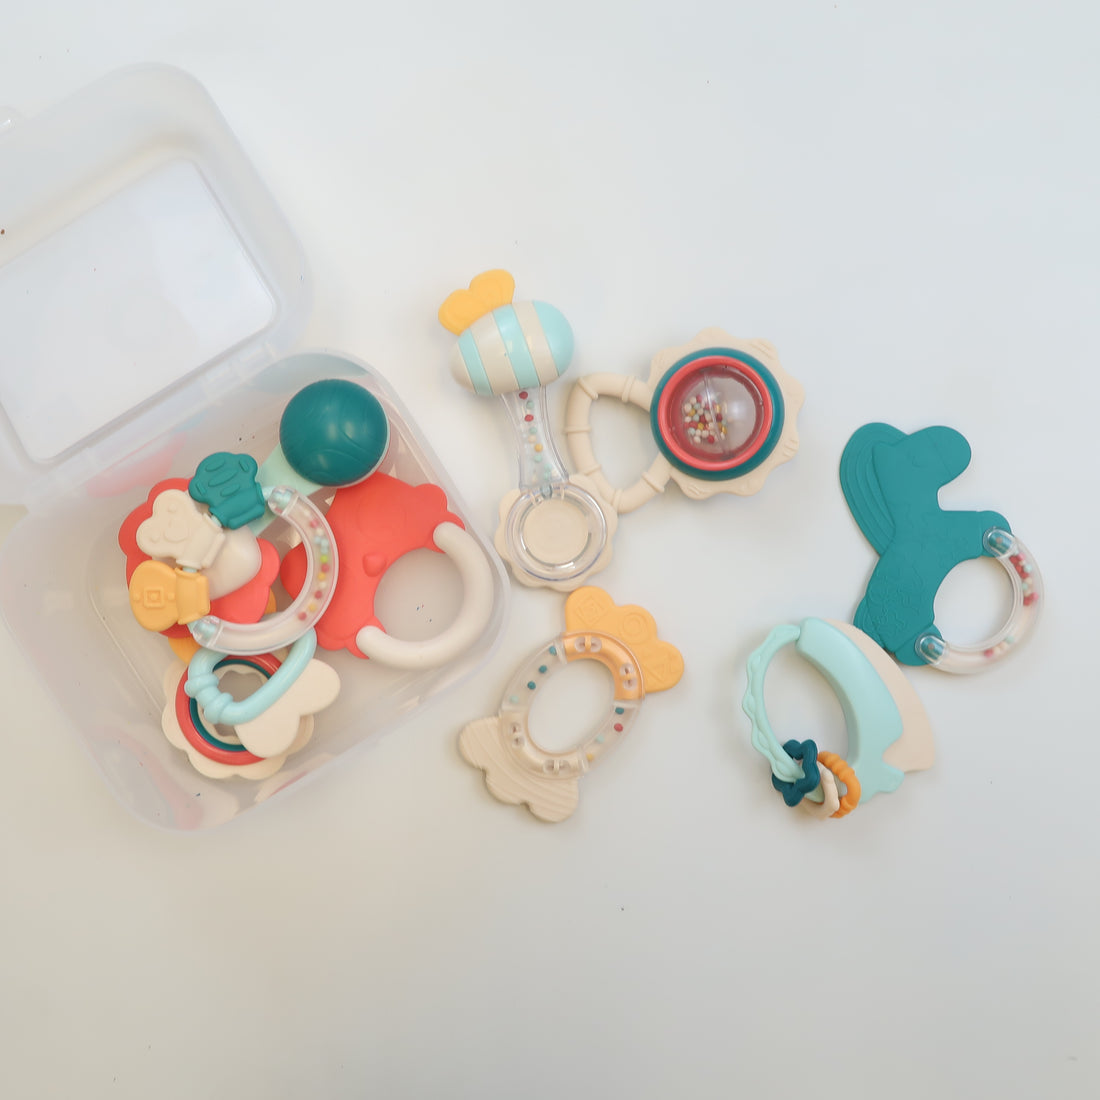 HahaLand - Baby Teethers and Rattles (OS)